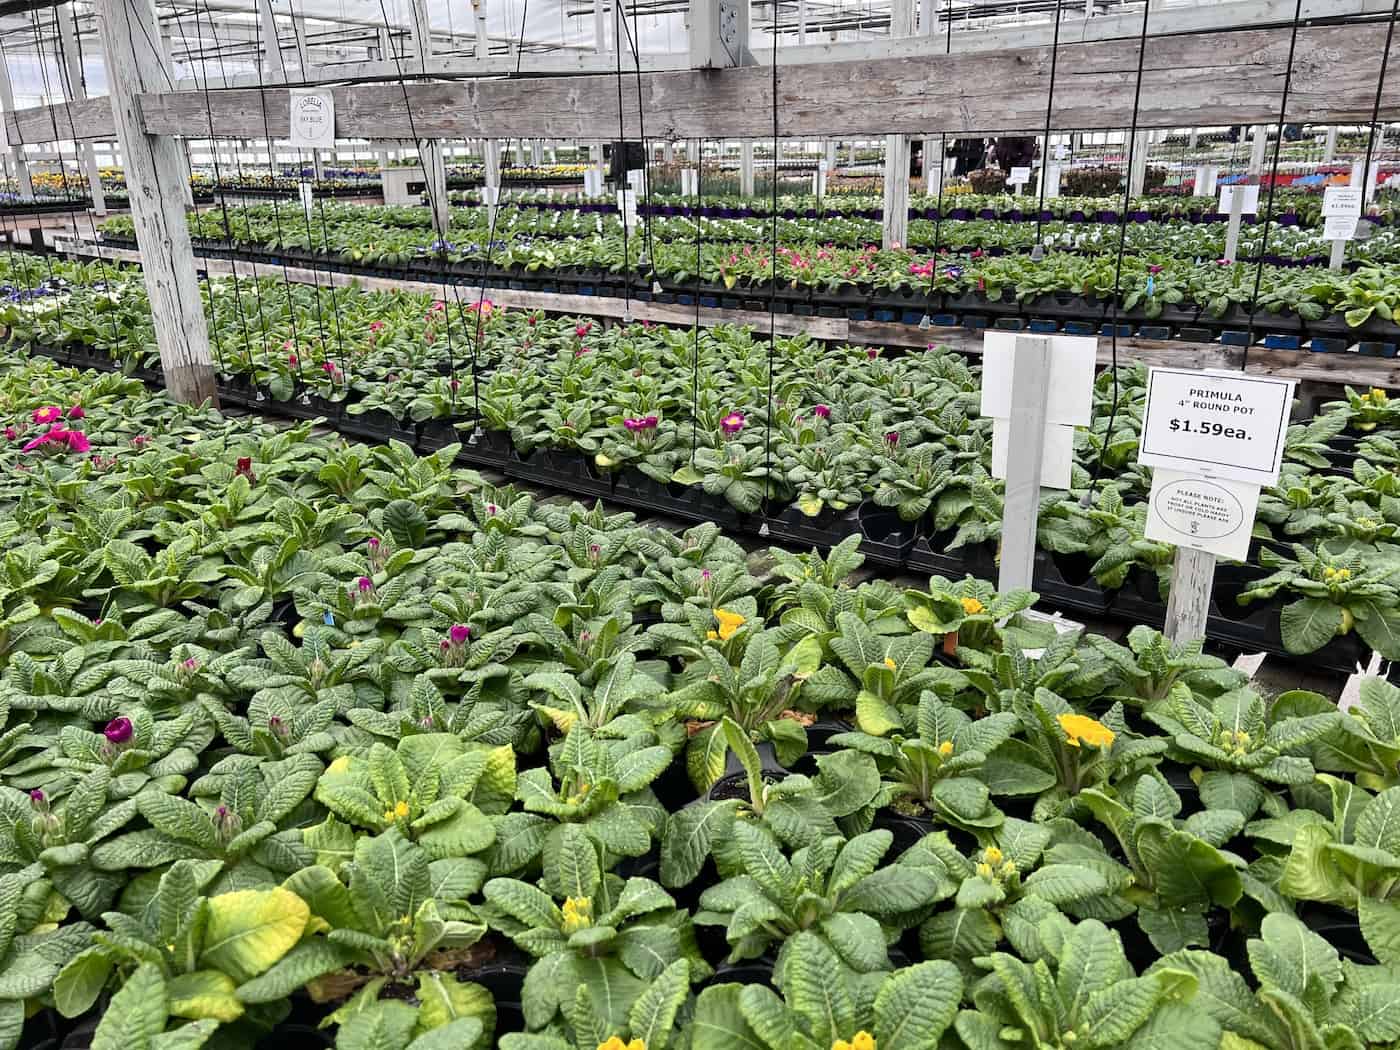 Primroses for sale in early spring